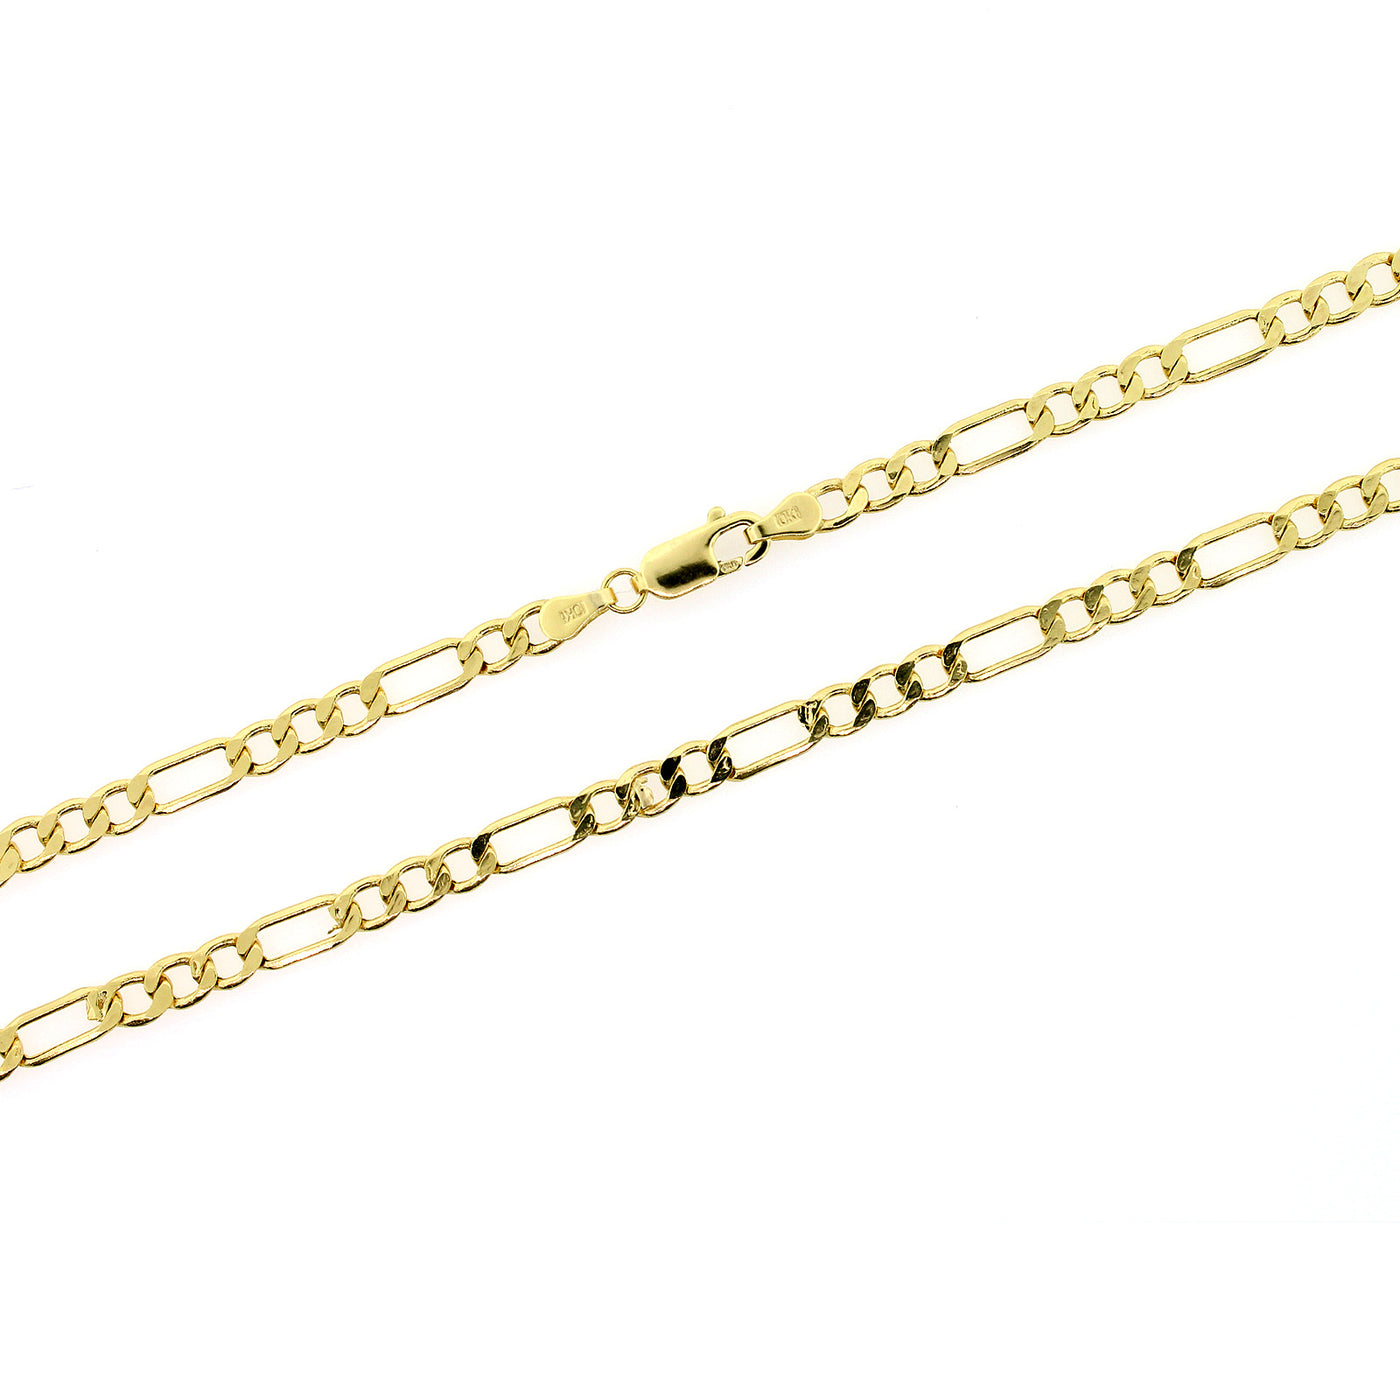 10K Solid Yellow Gold Men's Figaro Link Chain Necklace 3.5MM 16" 18" 20" 22" 24"